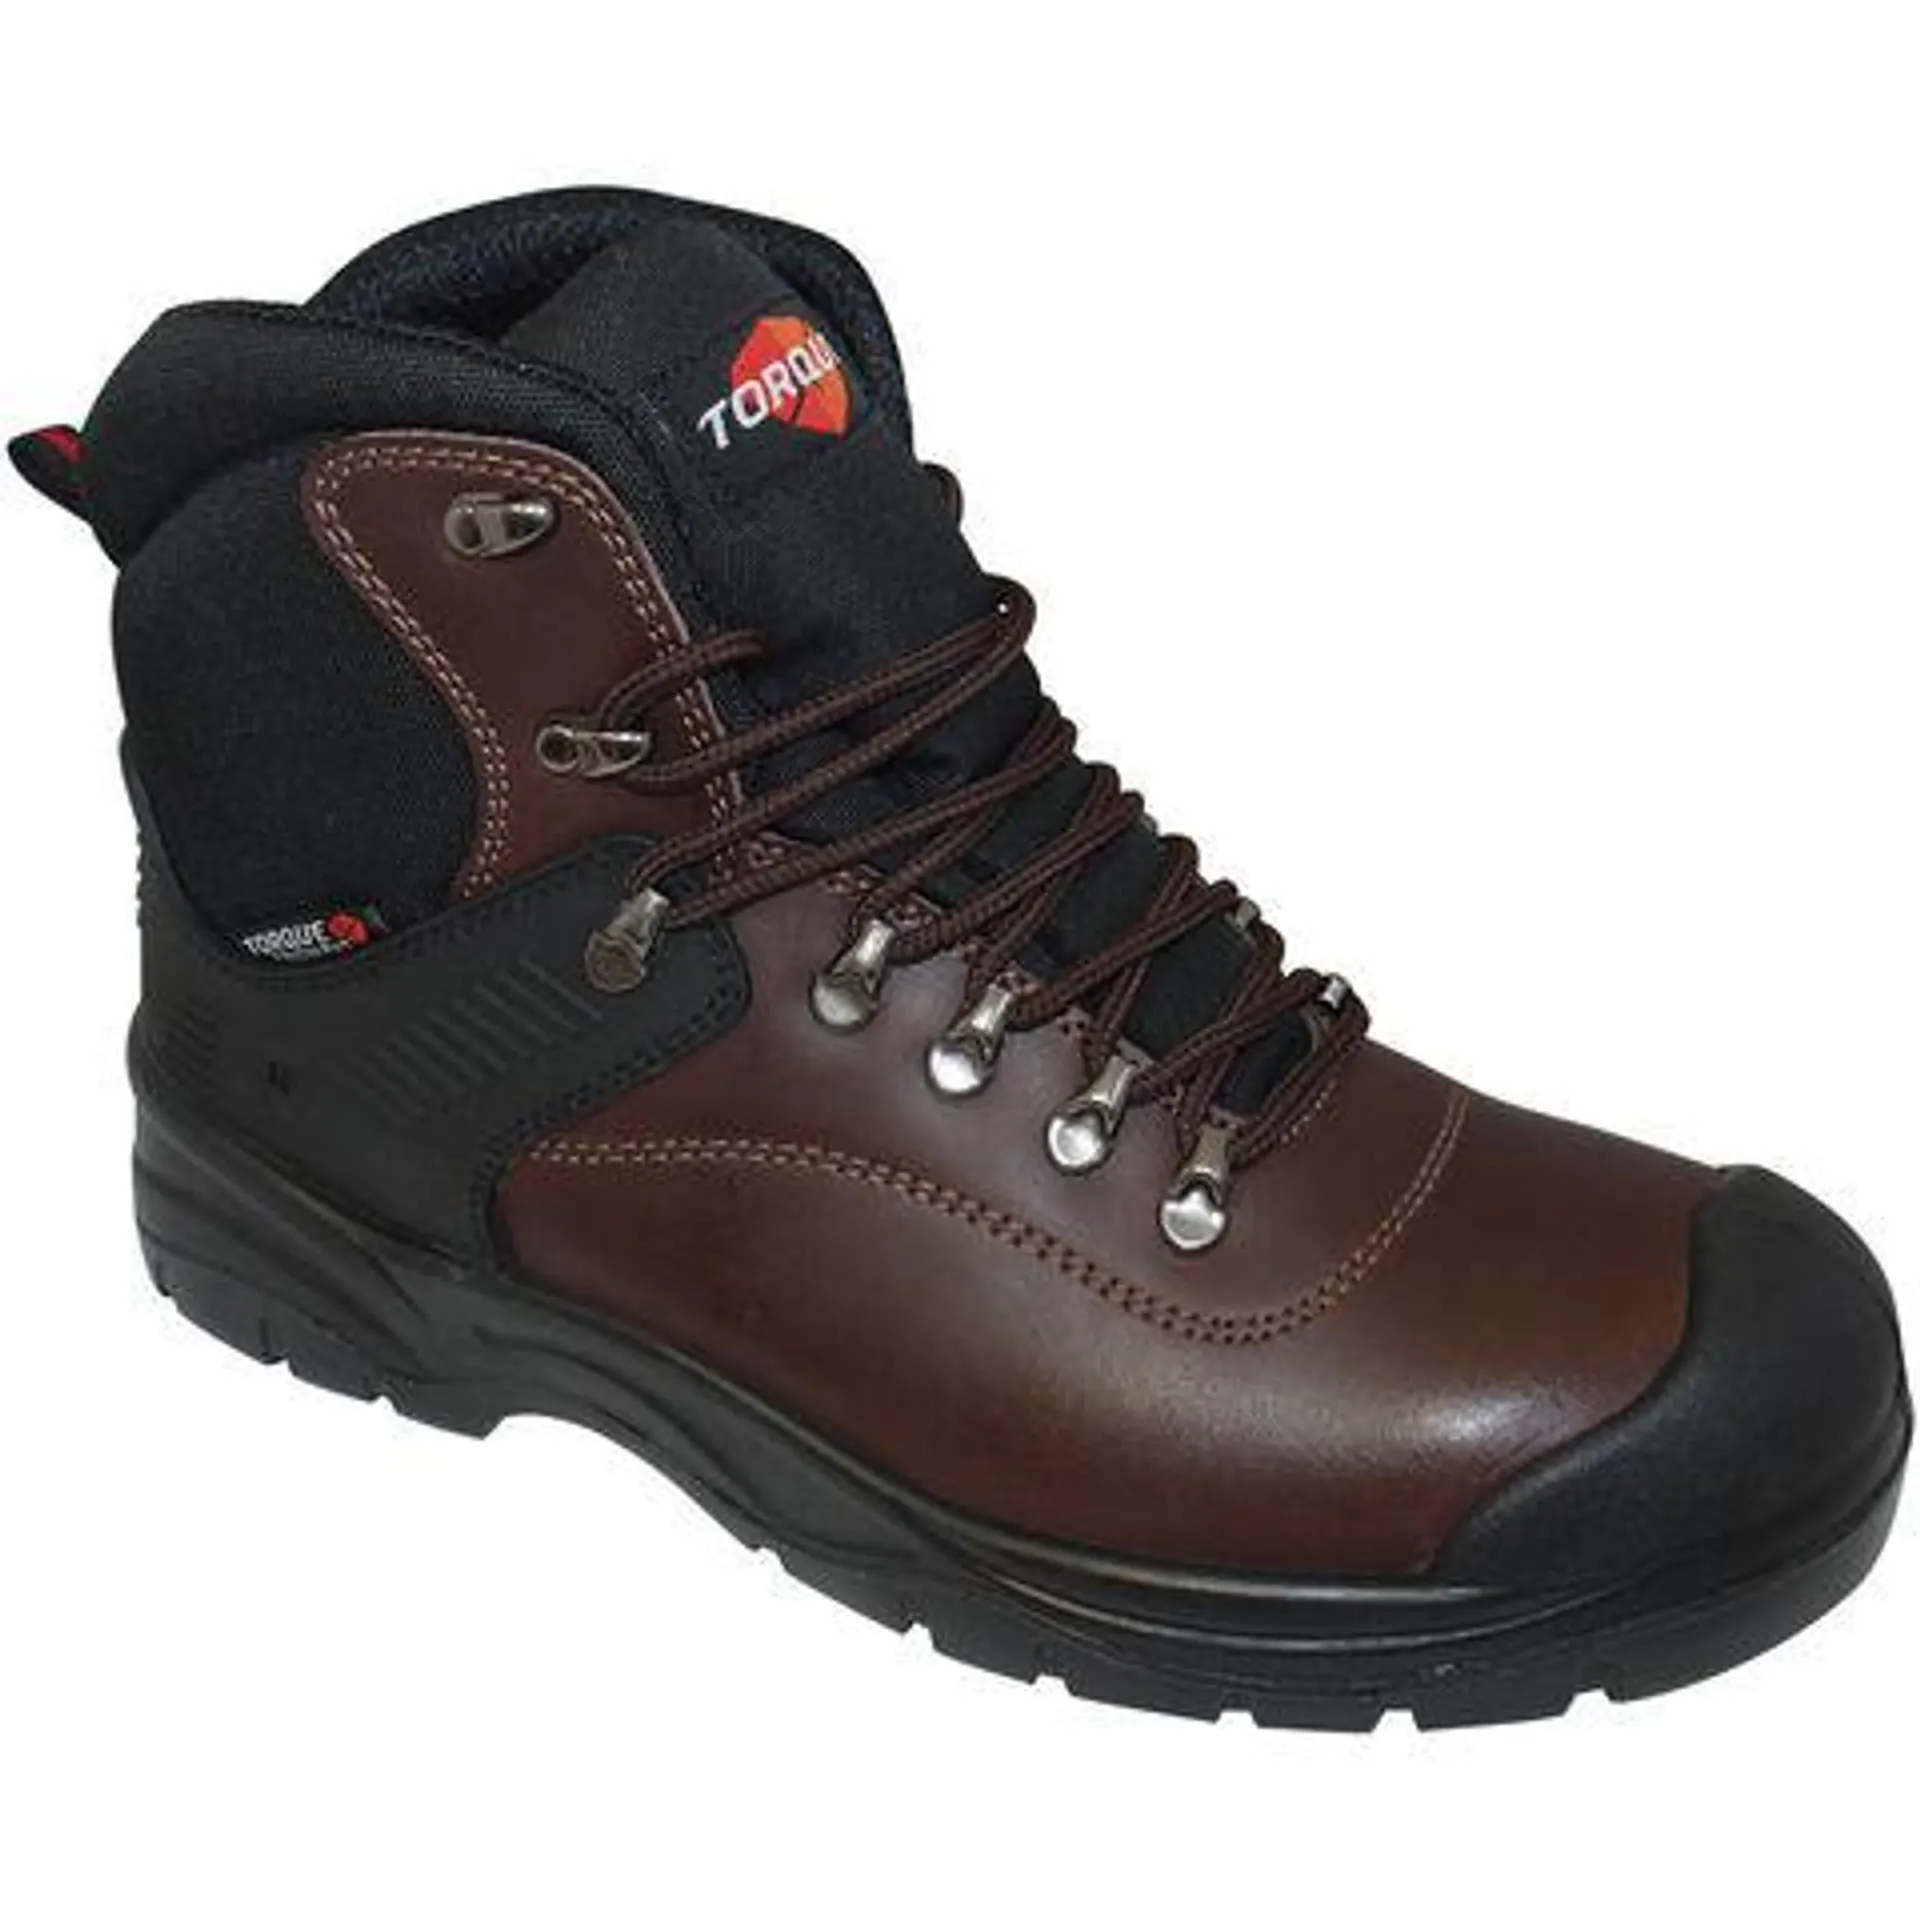 Torque Freeway Water Resistant Safety Boot